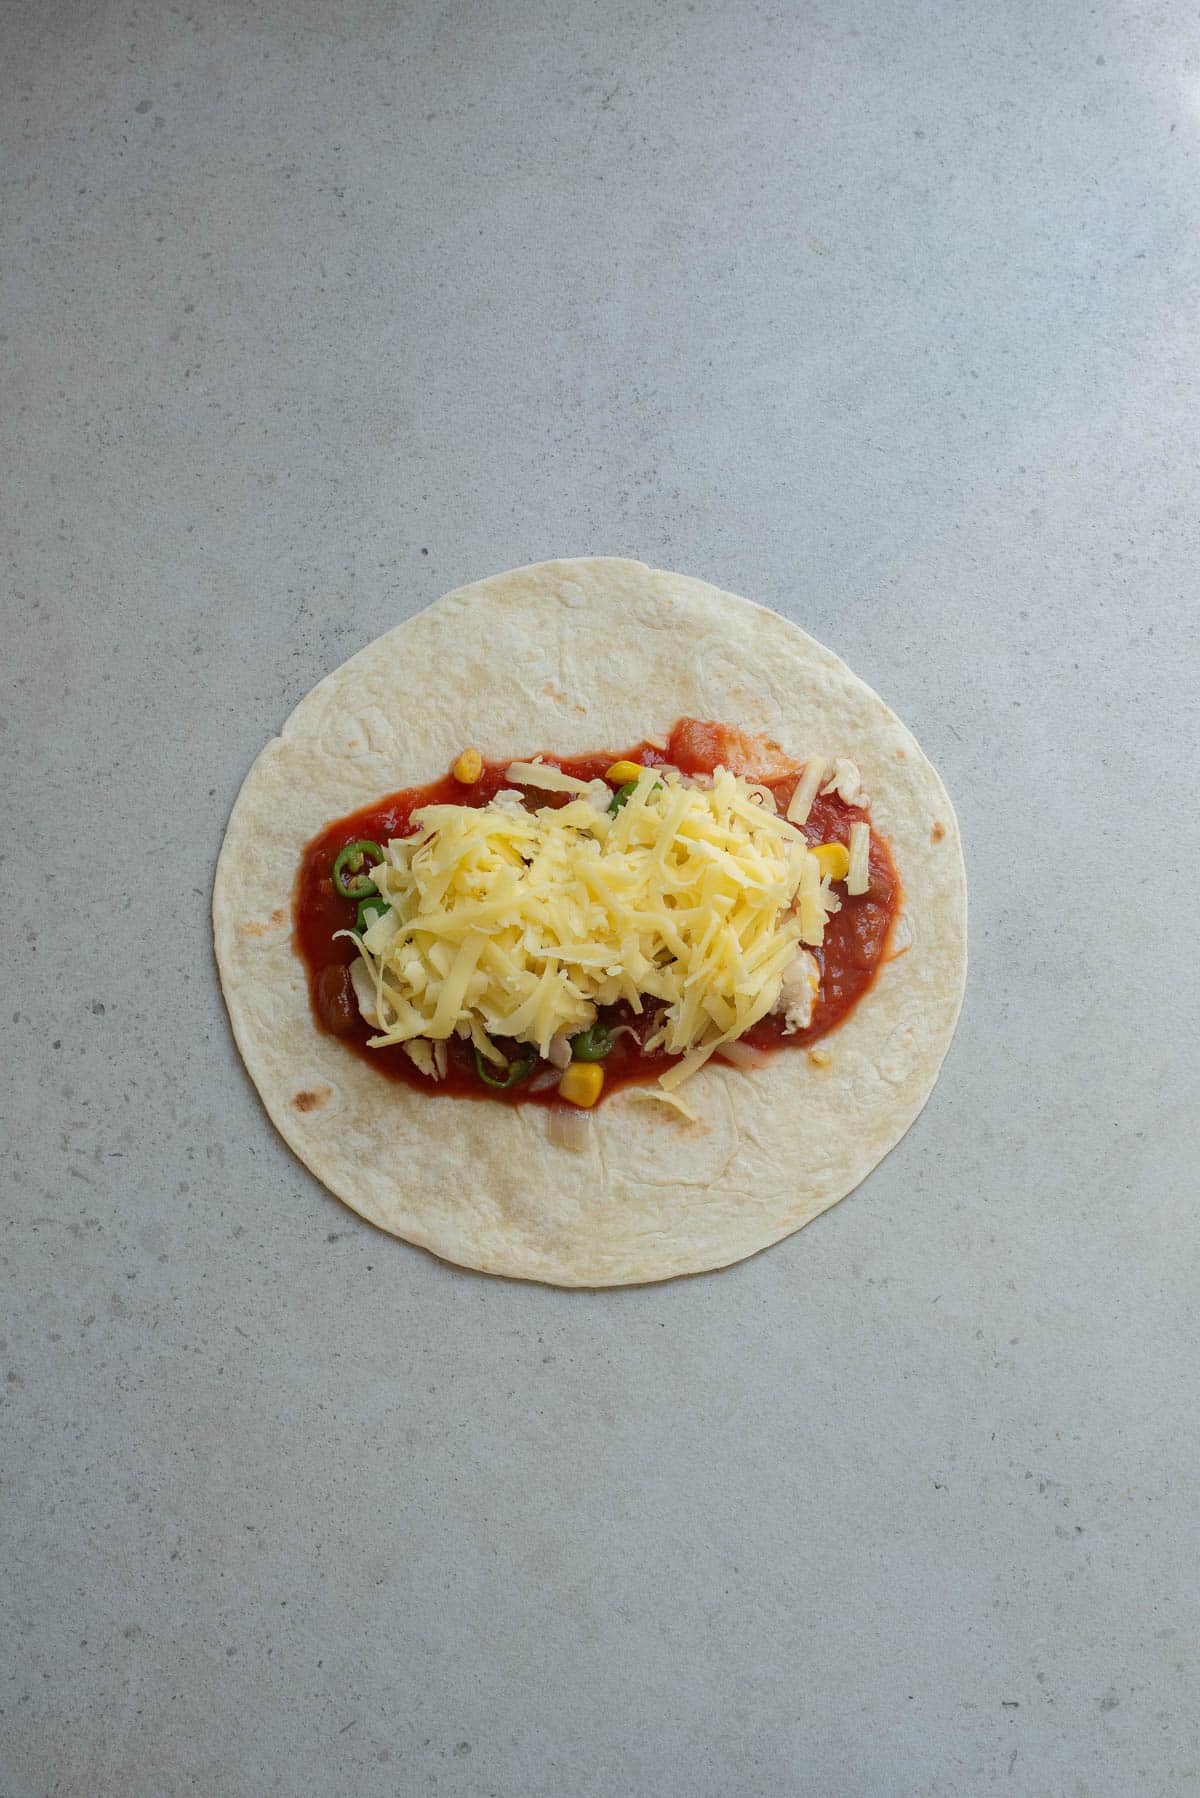 Tortilla with filling and cheese on top.